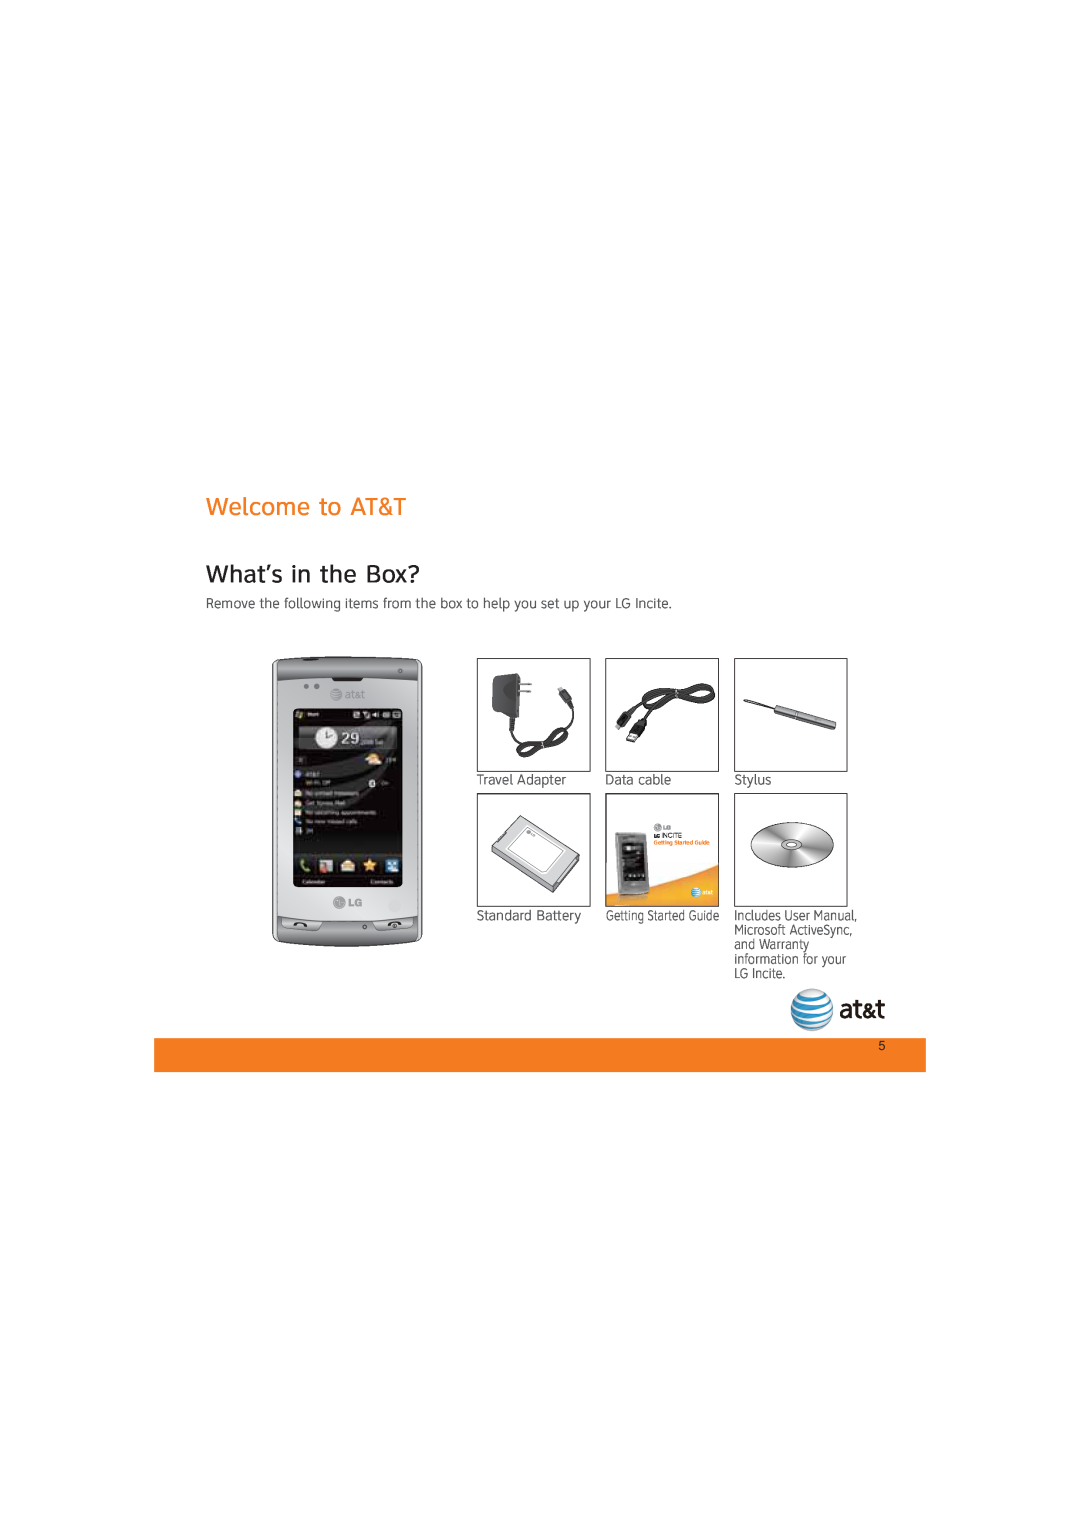 LG Electronics MCD0009405 specifications Welcome to AT&T, What’s in the Box?, Getting Started Guide, information for your 